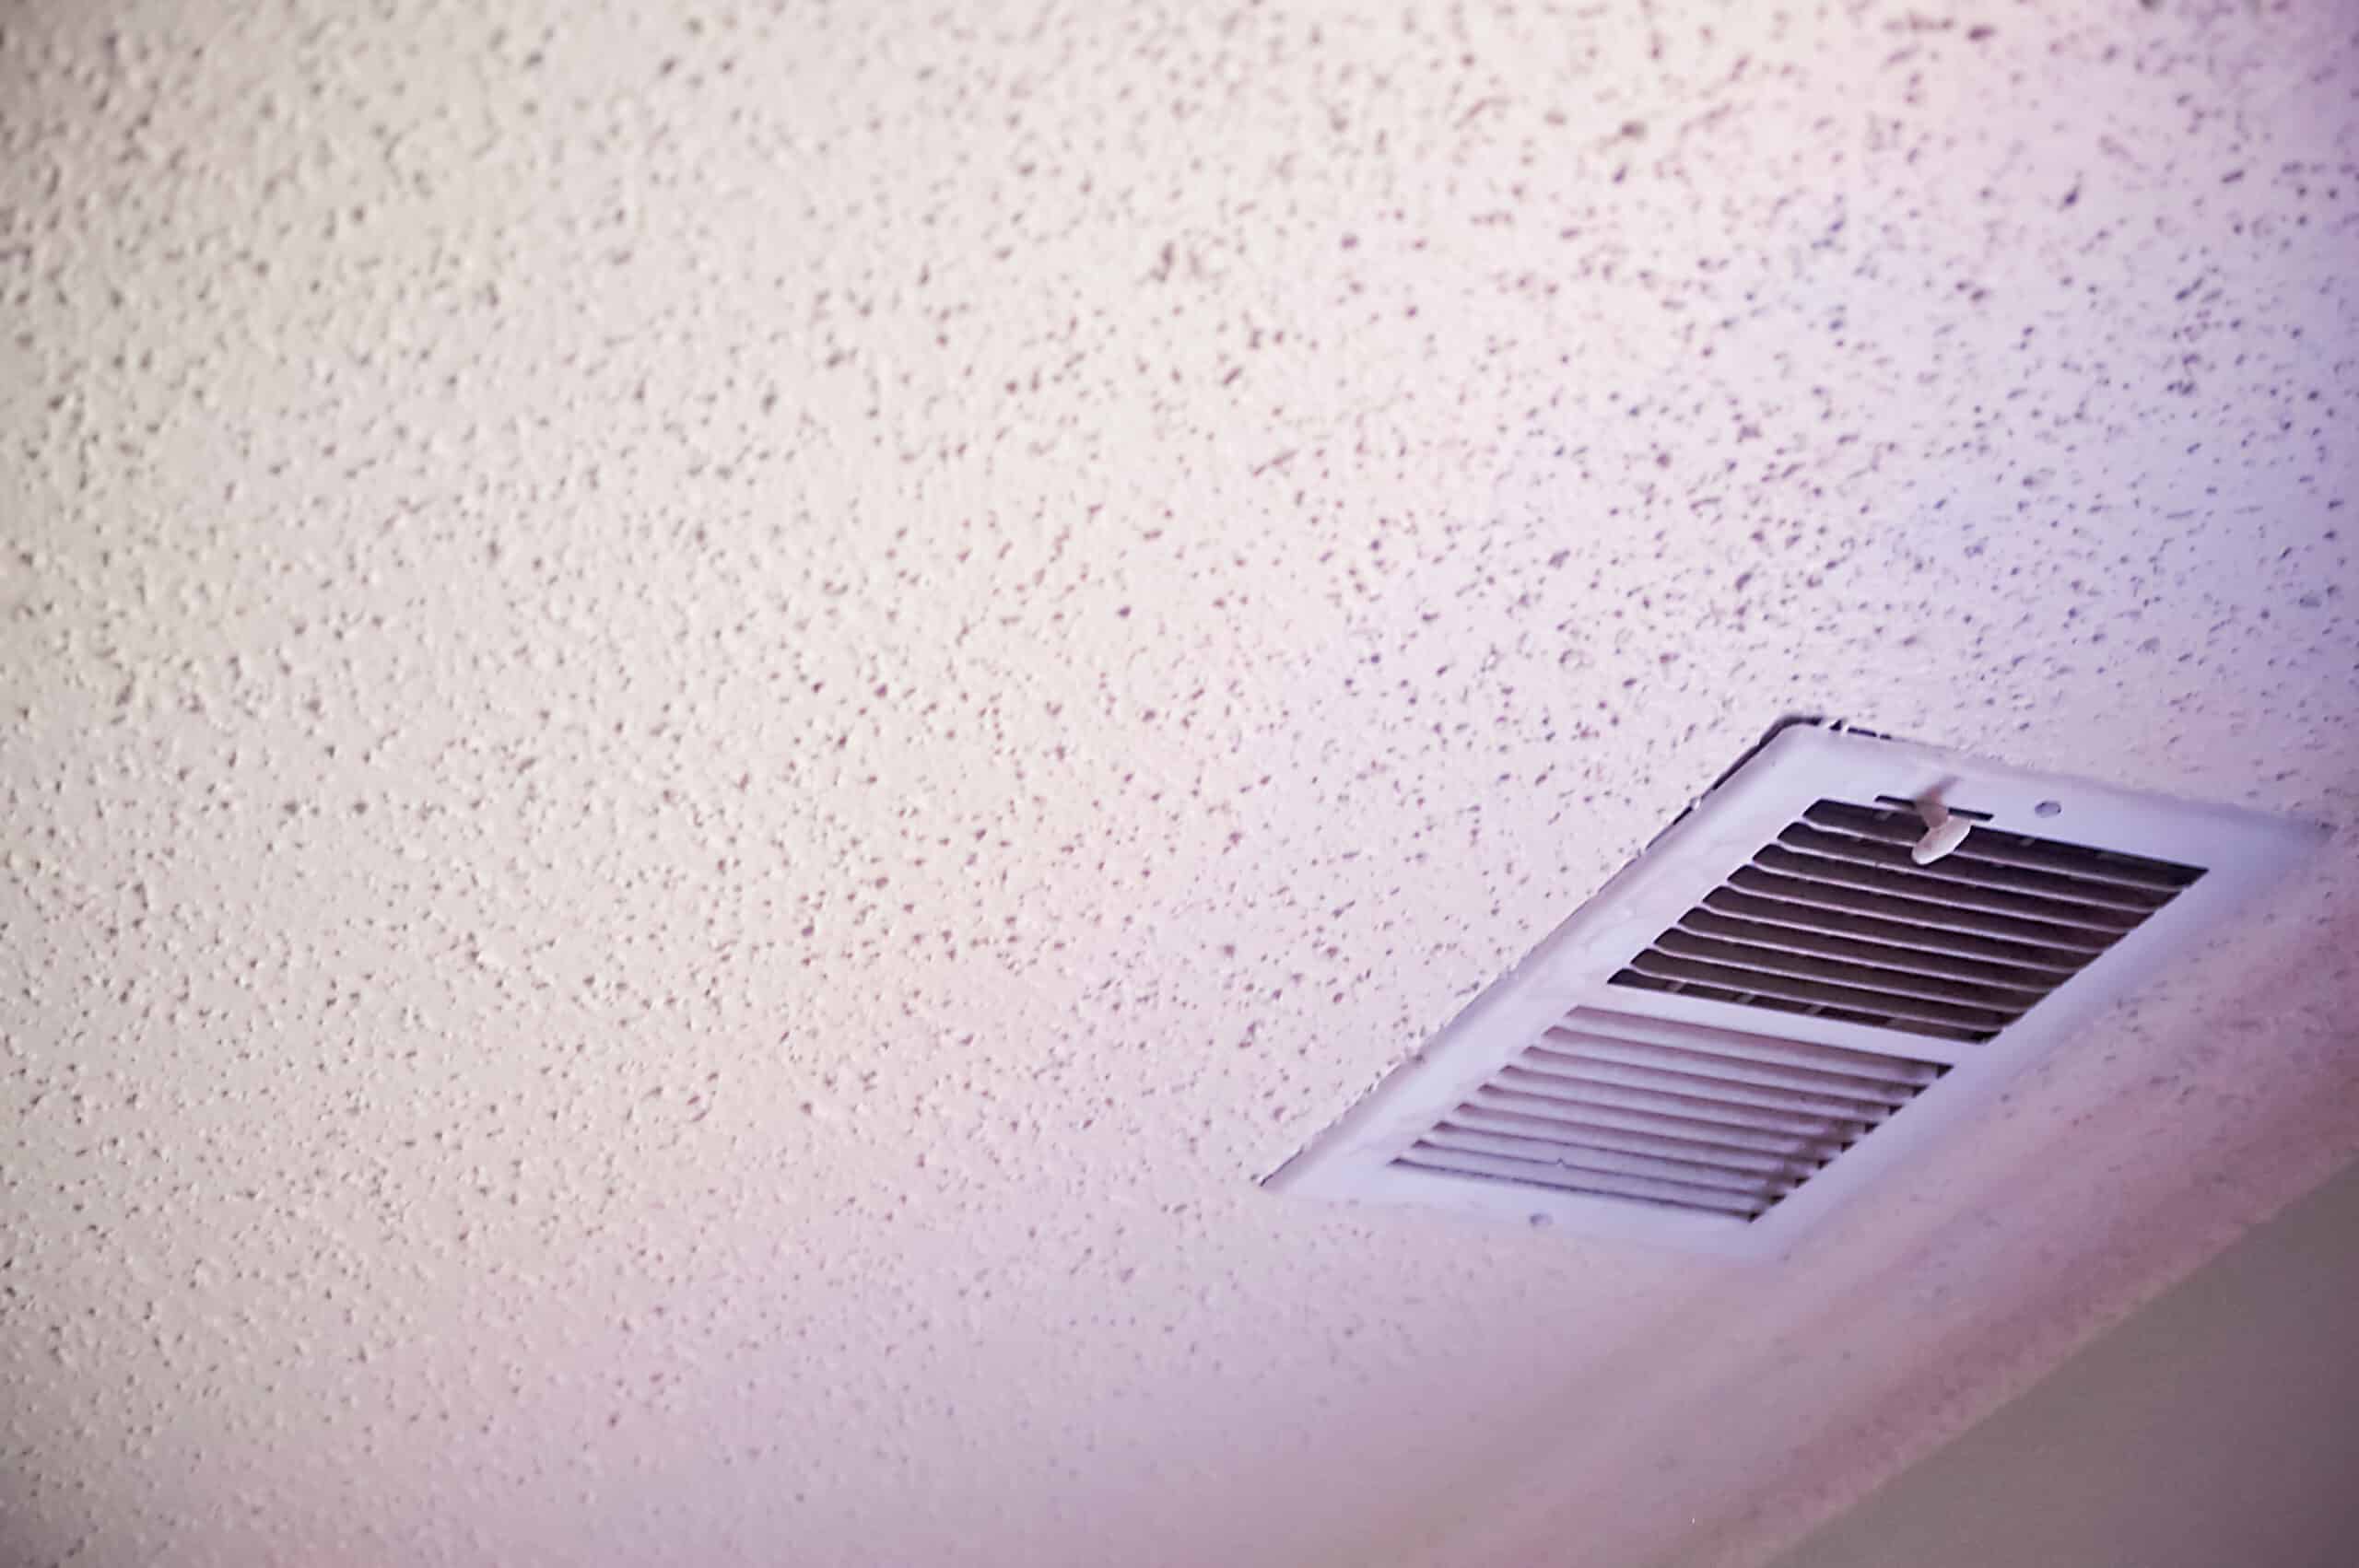 Popcorn ceiling with a heating or cooling vent.